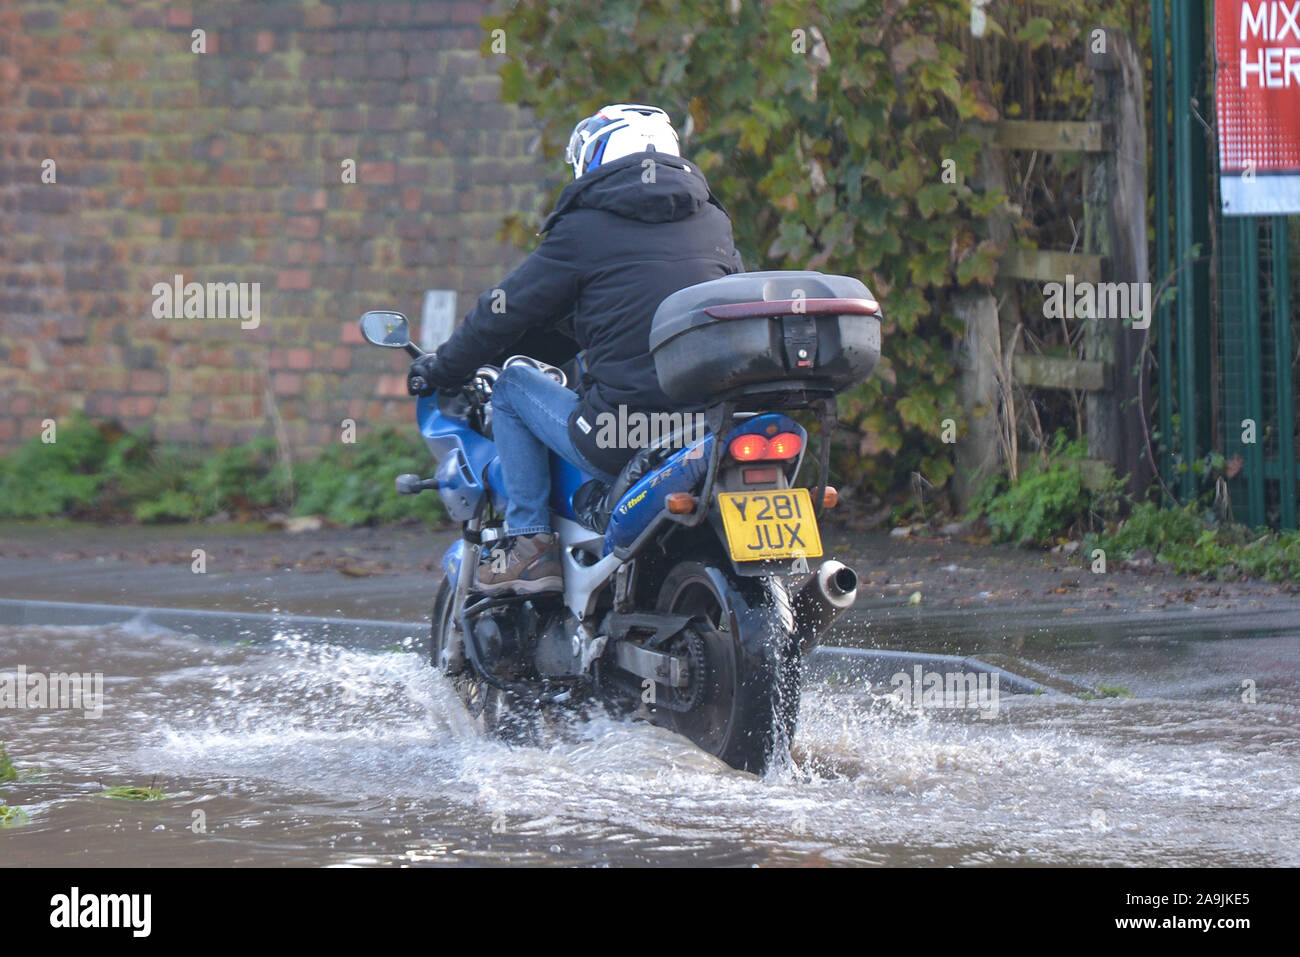 Tewkesbury, Gloucestershire UK. 16th November, 2019. A Motorbike rider lifs his legs as he navigates his way through floods in Tewkesbury town center which has been hit by severe flooding as the River Avon has burst its banks. River levels continue to rise and are expected to peak at over 12 meters above normal river levels late on Saturday afternoon. Pic taken 16/11/2019. Credit: Sam Holiday/Alamy Live News Stock Photo